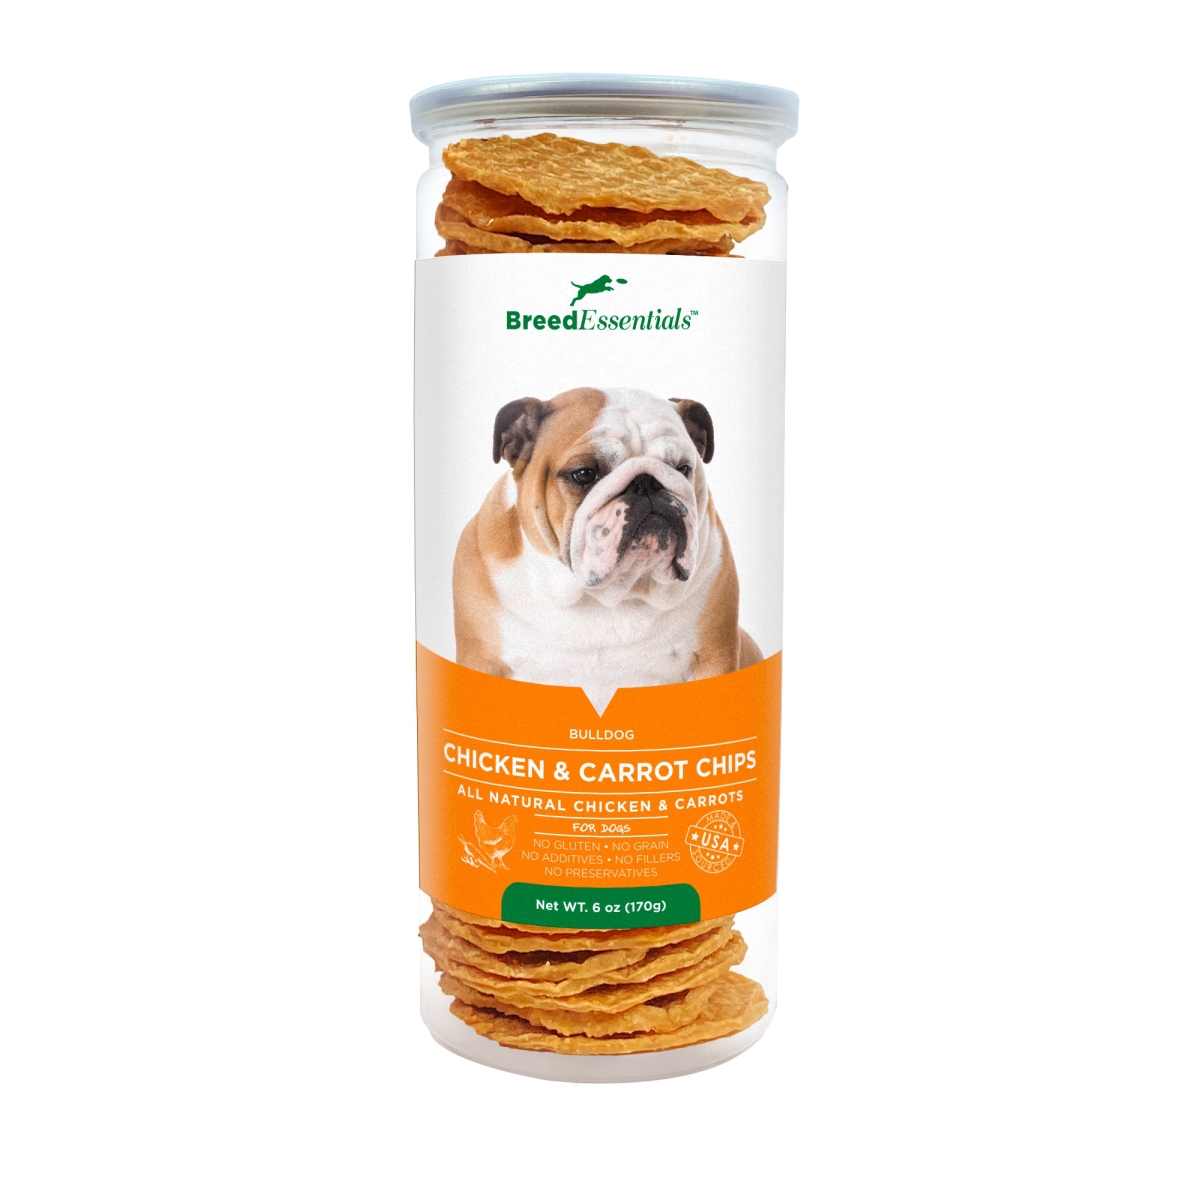 Picture of Breed Essentials 197247000280 6 oz Chicken & Carrot Chips - Bulldog